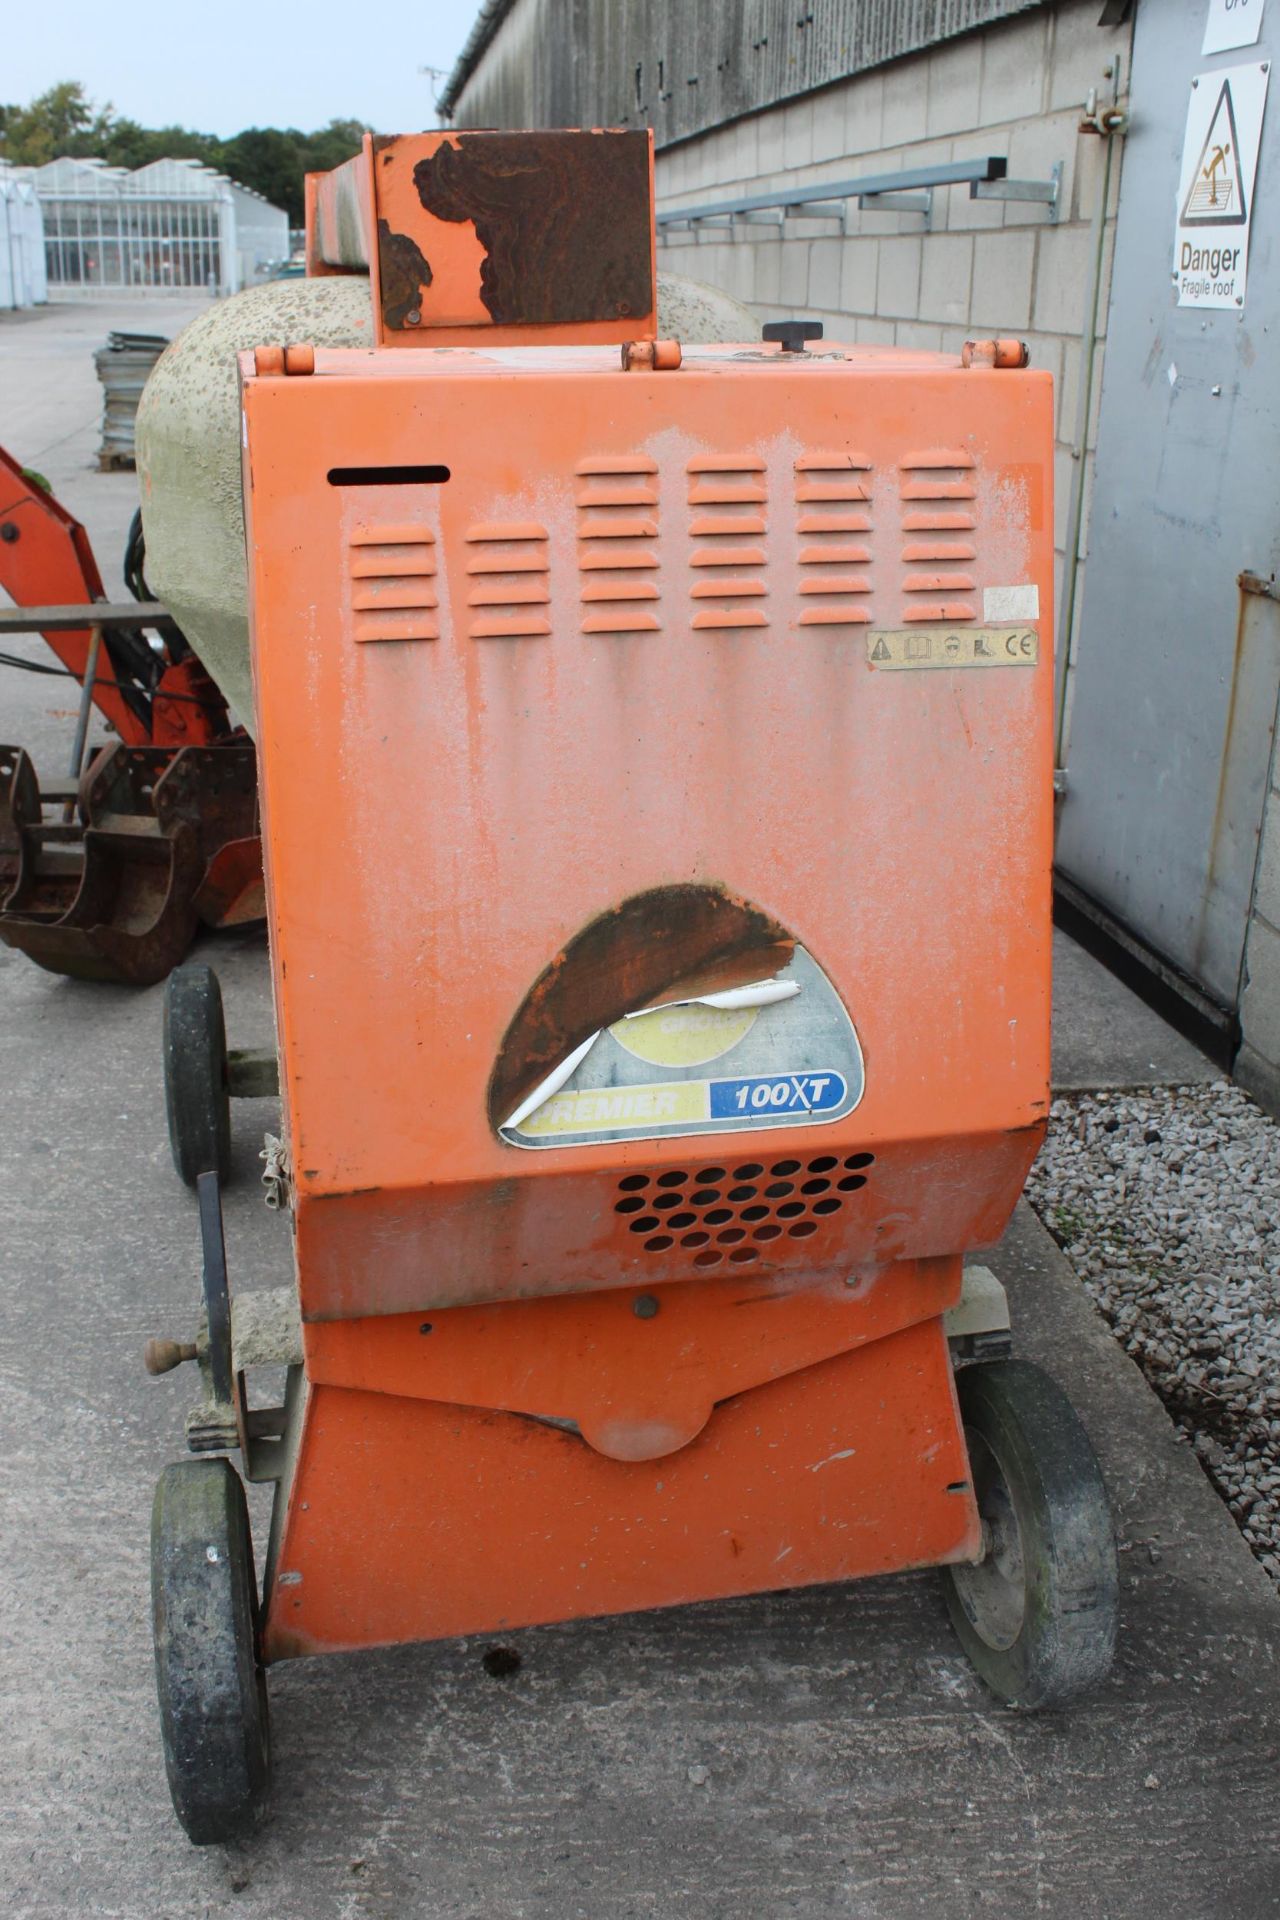 BELLE 100XT DIESEL CEMENT MIXER IN WORKING ORDER STARTING HANDLE & MANUAL IN THE PAY OFFICE NO VAT - Image 3 of 3